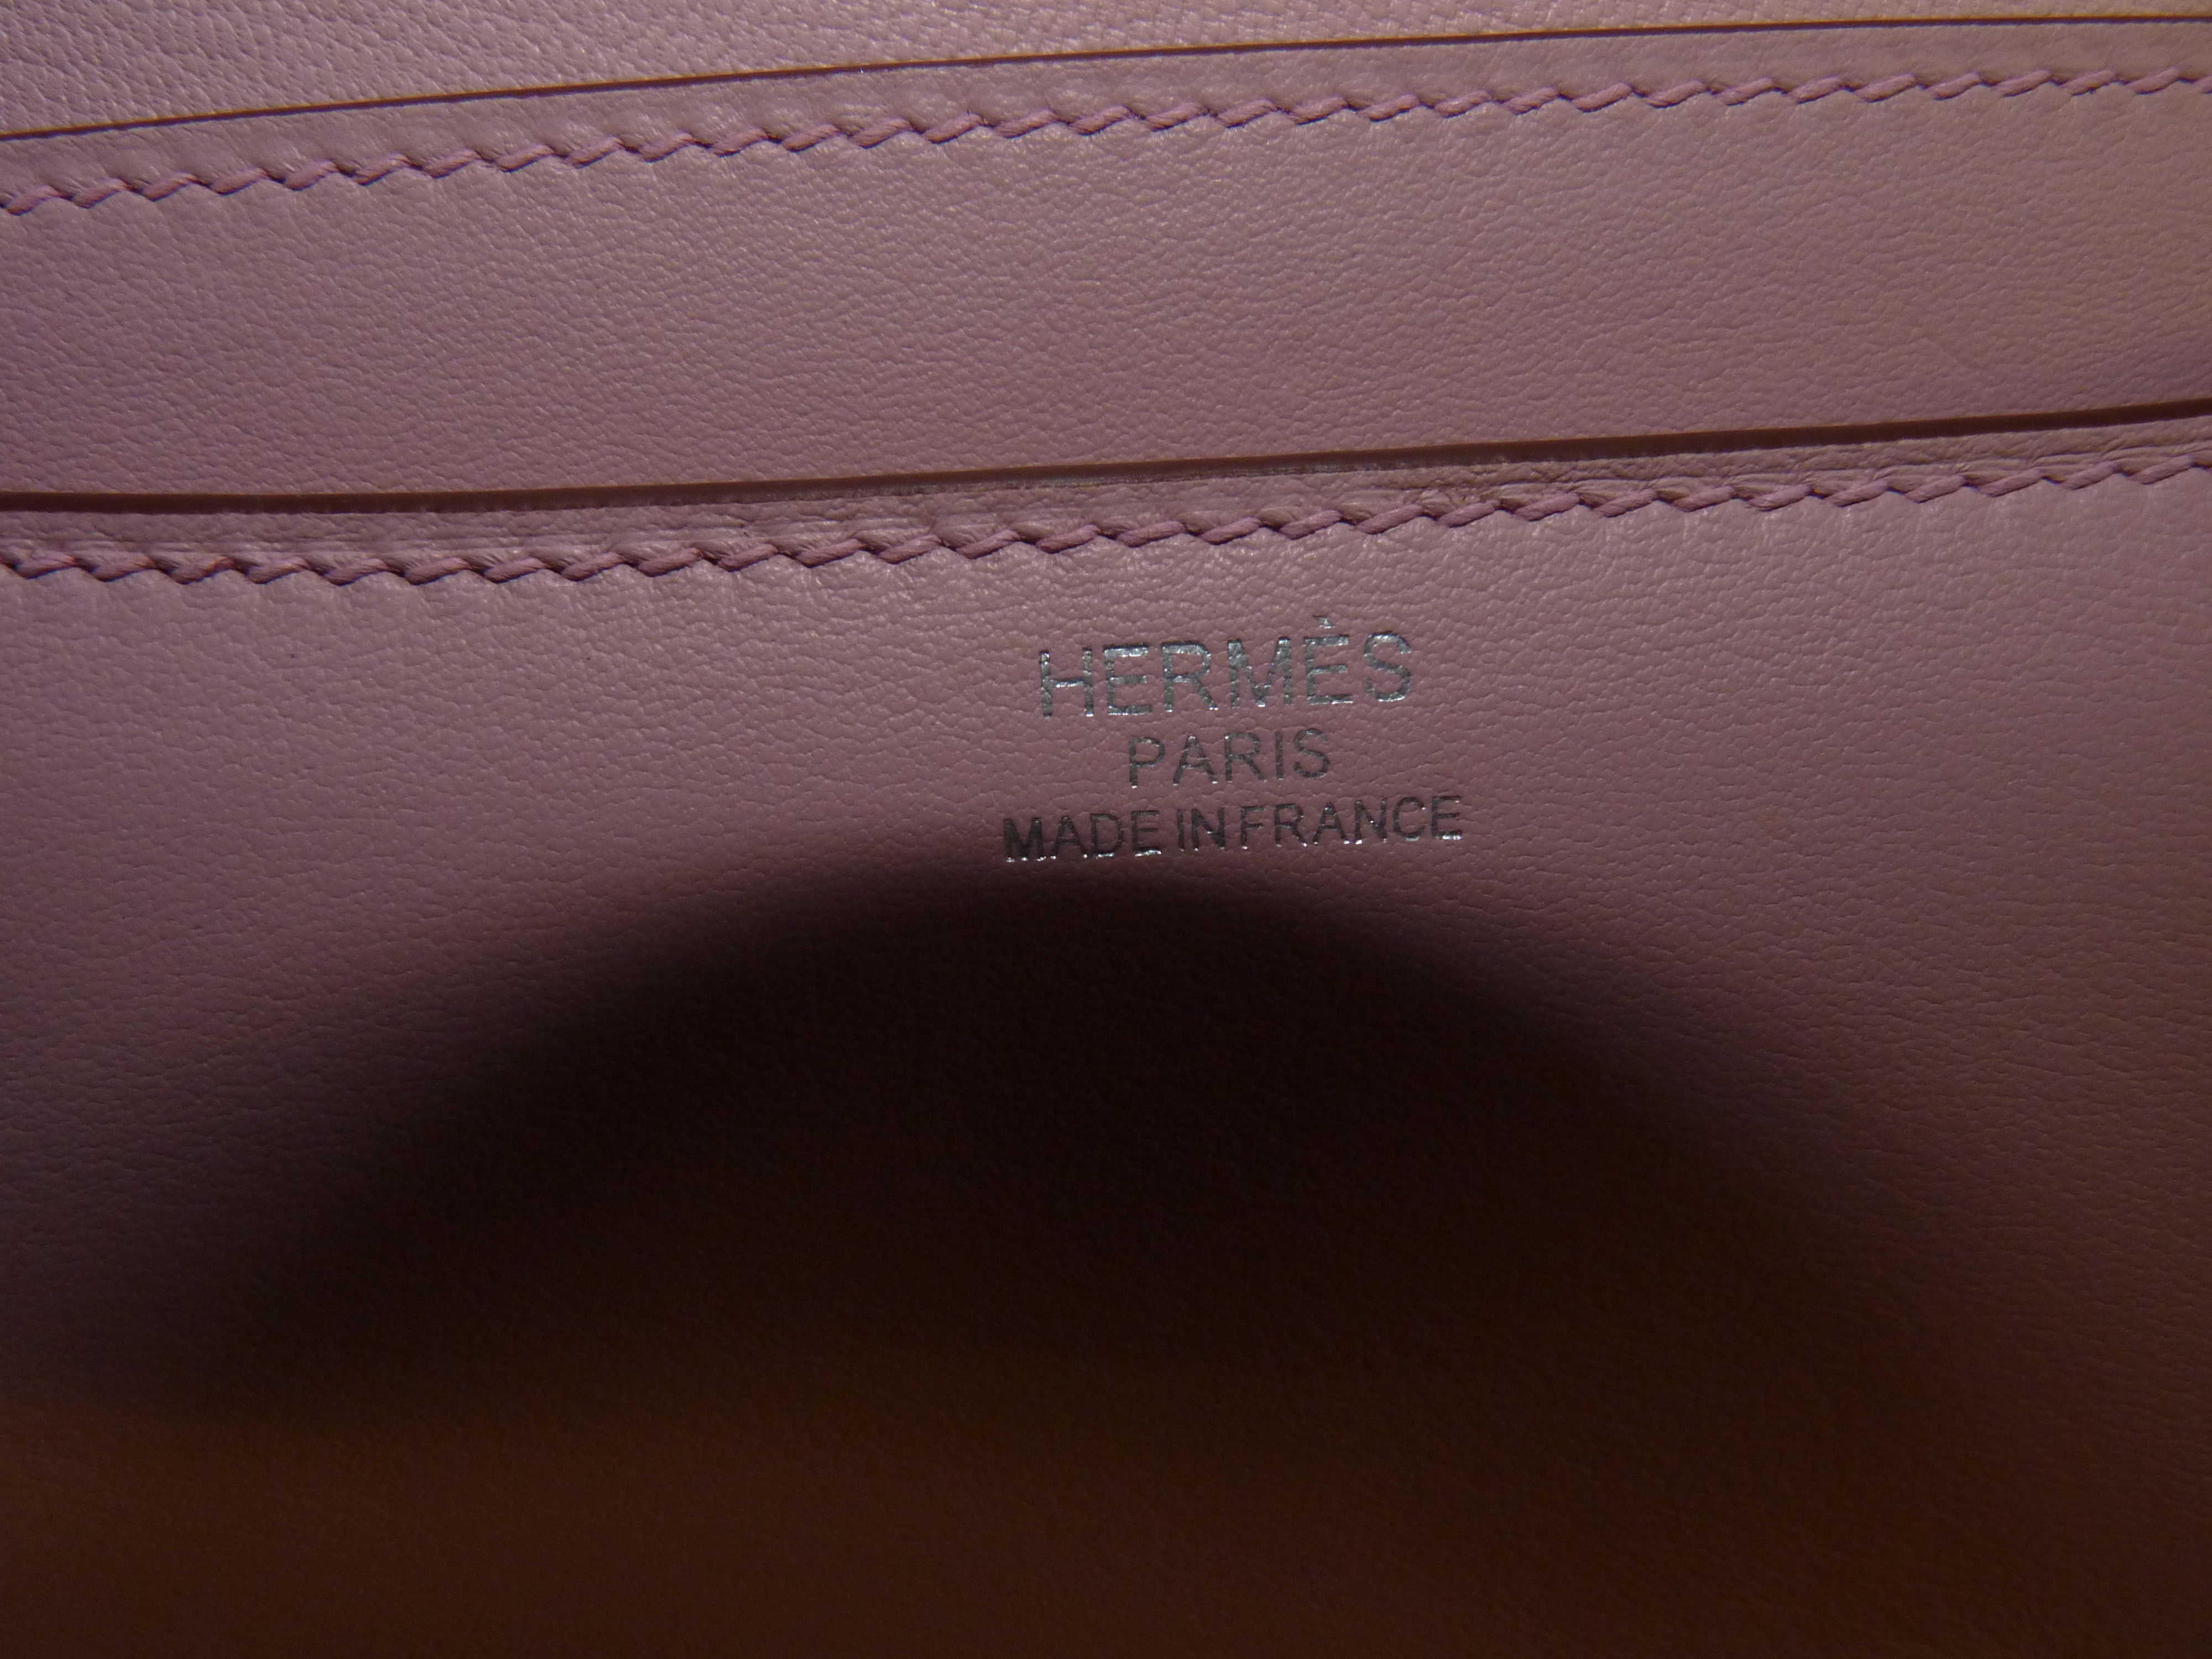 Hermes Constance handbag 24cm in pink with box and bag etc.Marked GLY745 - Image 8 of 11